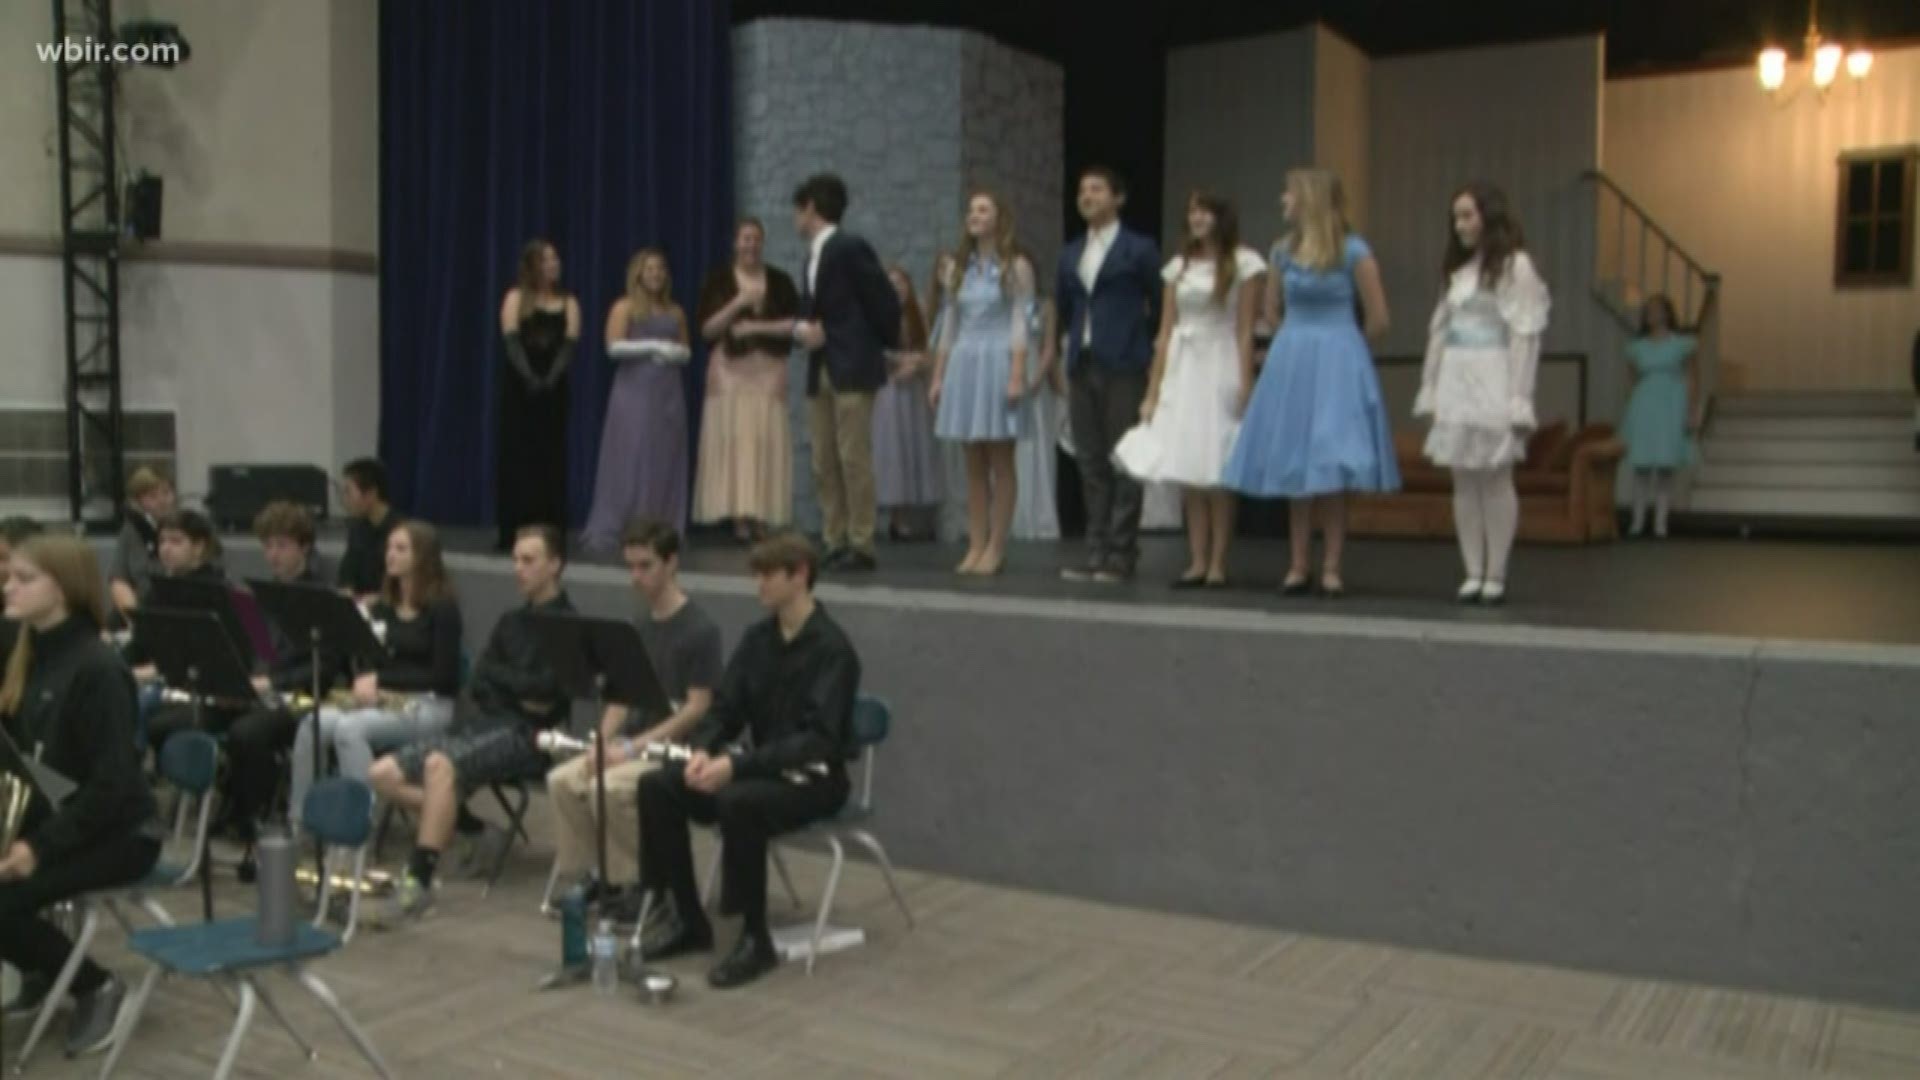 Farragut High School students are bringing "The Sound of Music" to East Tennessee